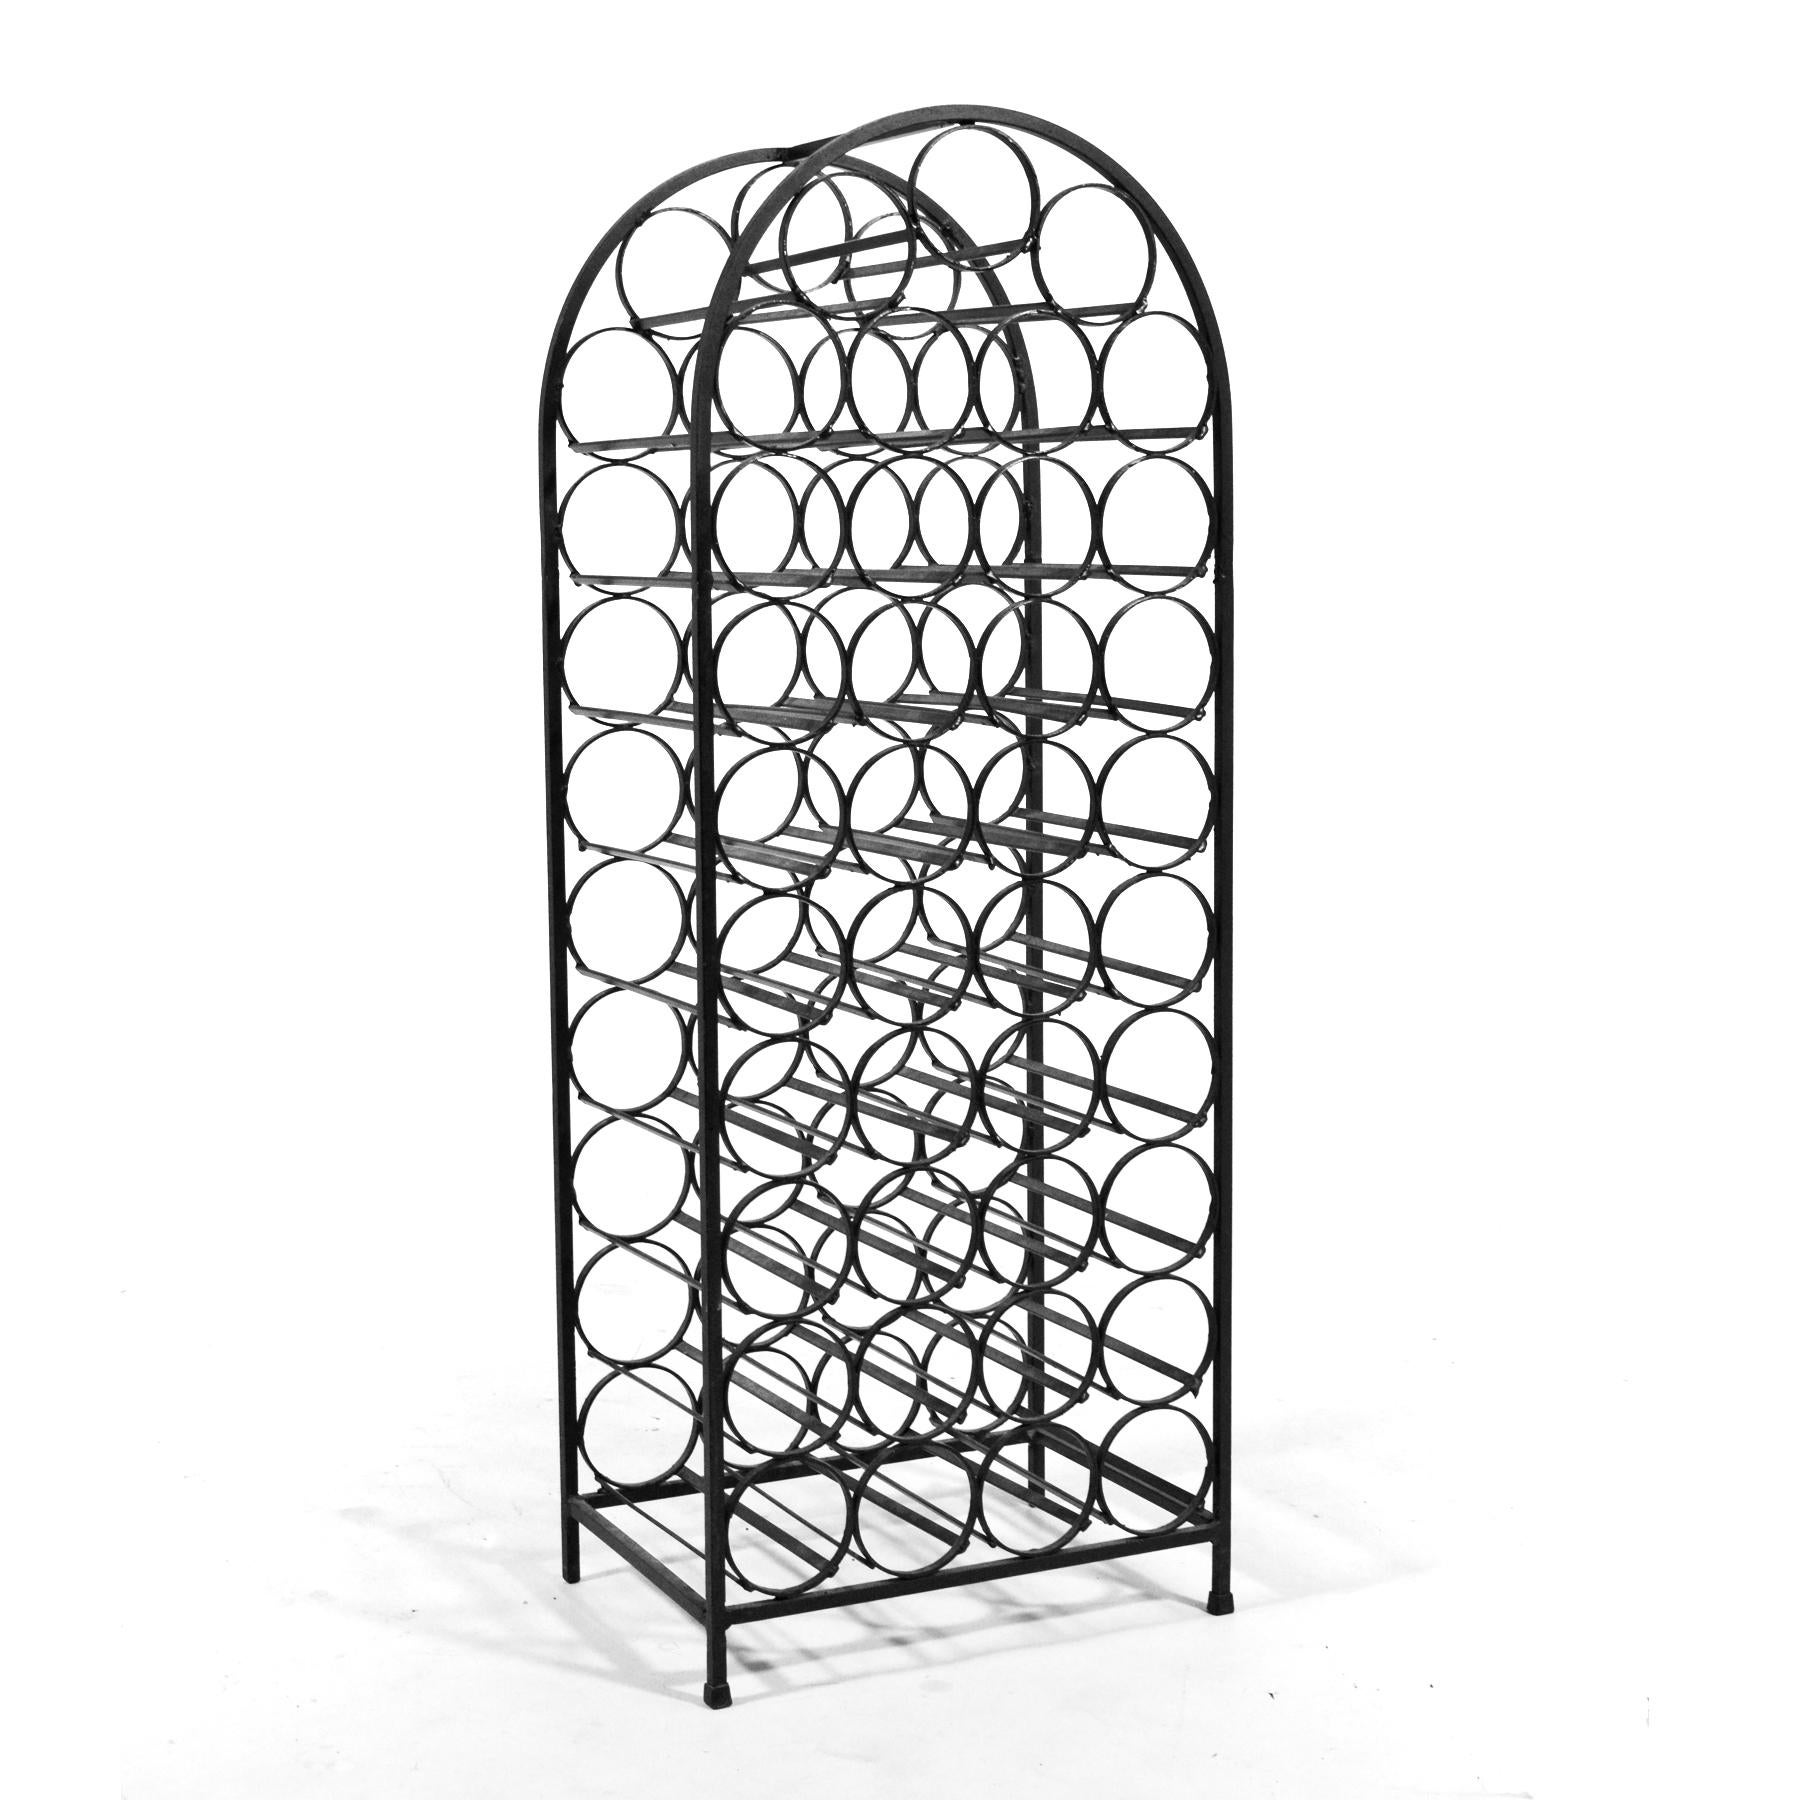 Ready to hold 39 wine bottles, this iron wine rack by Arthur Umanoff has a delightful curved top echoing the round shape of the bottle holders and a terrific graphic quality.

 